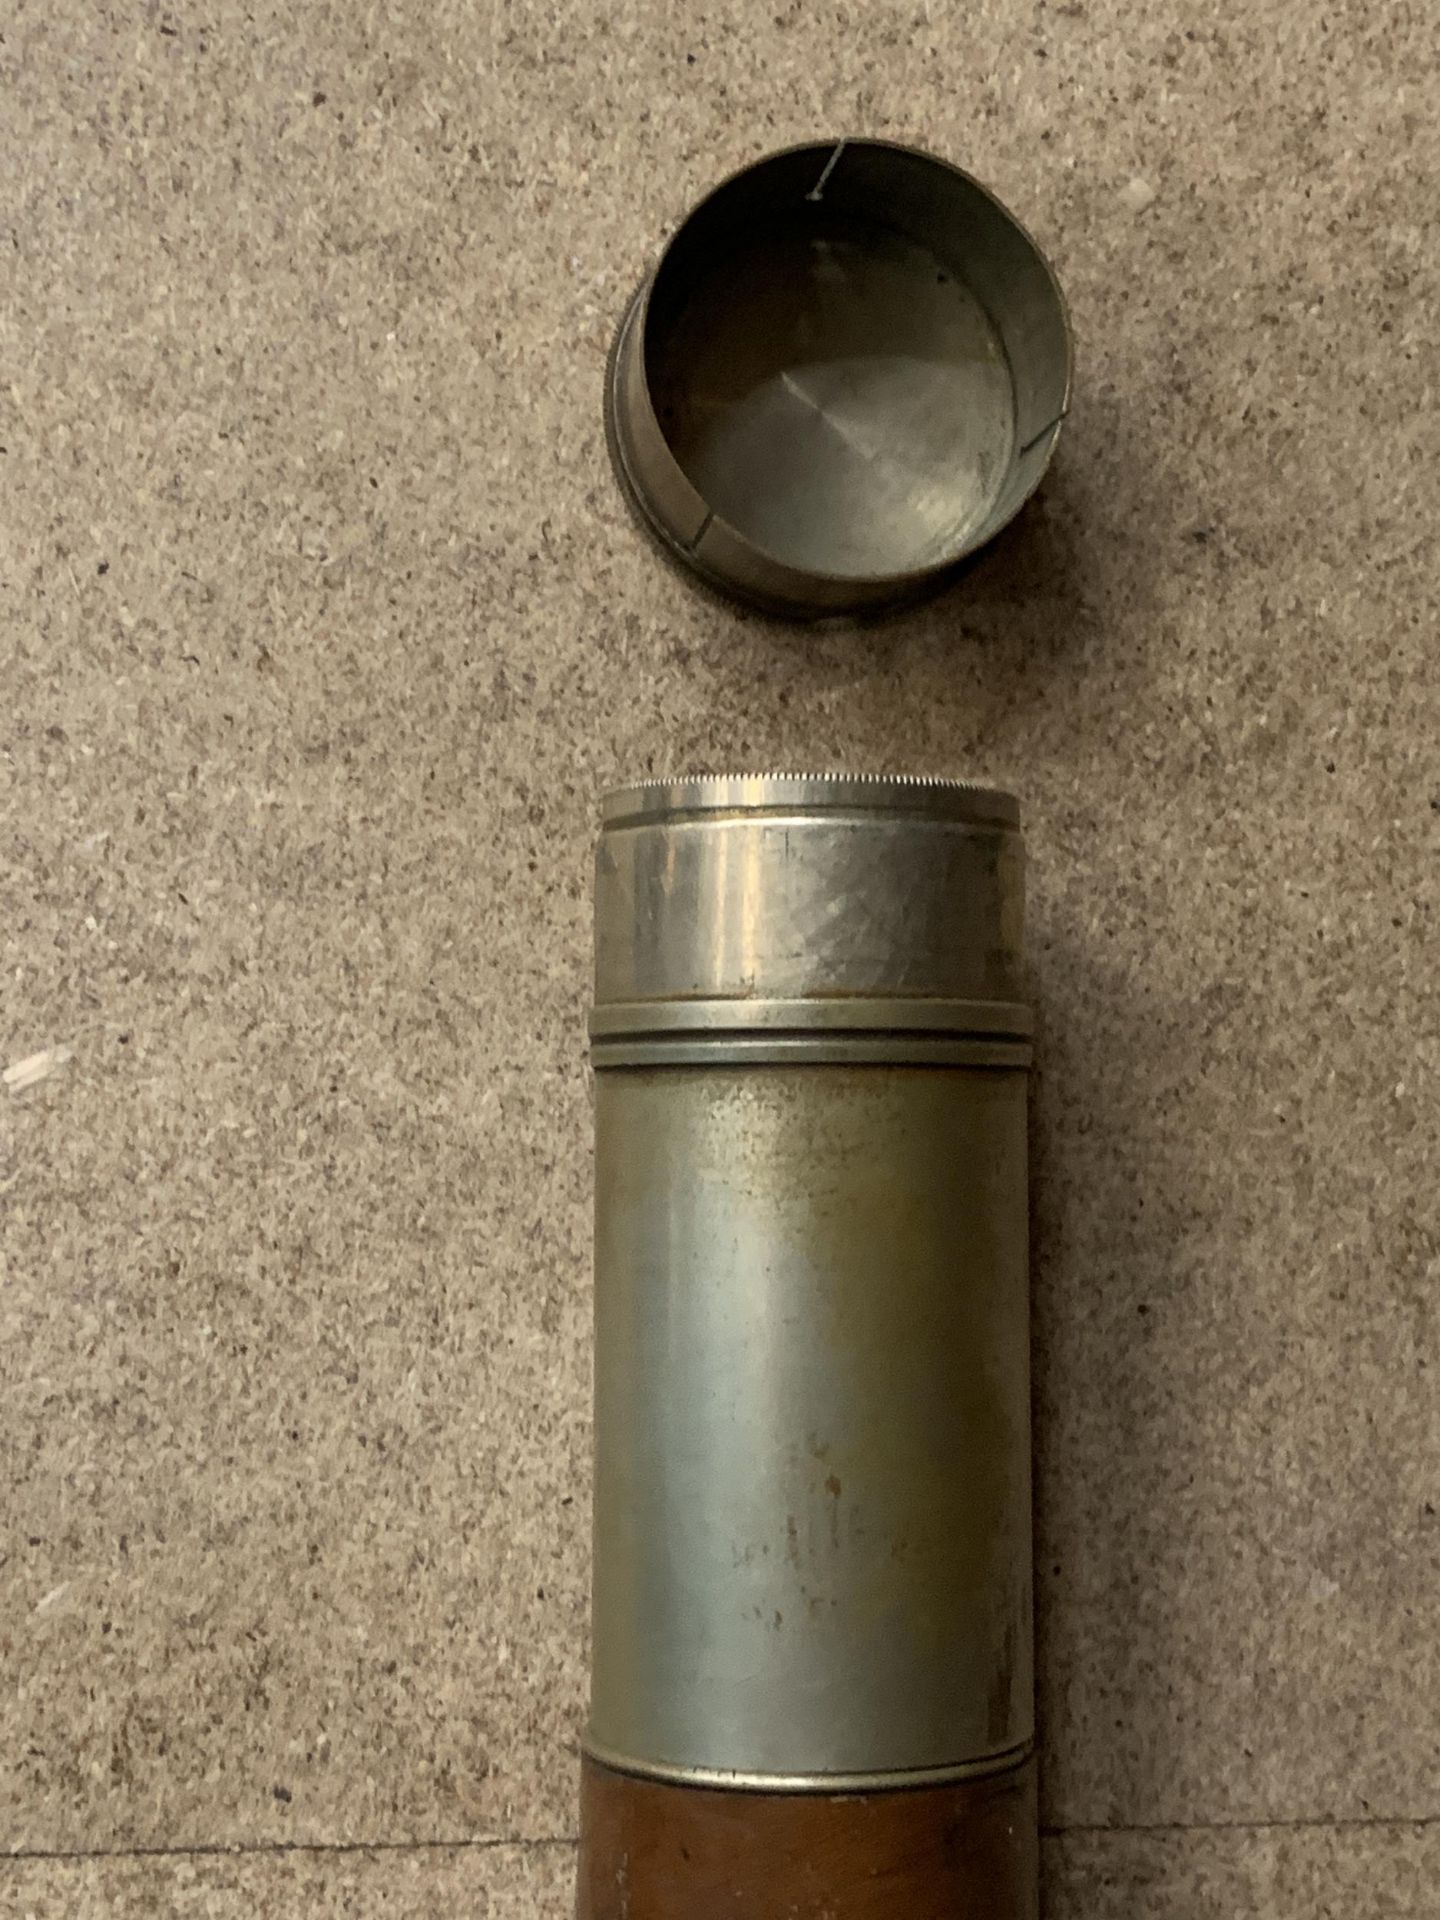 A VINTAGE BRASS TELESCOPE WITH LEATHER CASING MADE BY G LEE AND SON, 33 THE HARD, PORTSMOUTH - Image 3 of 4